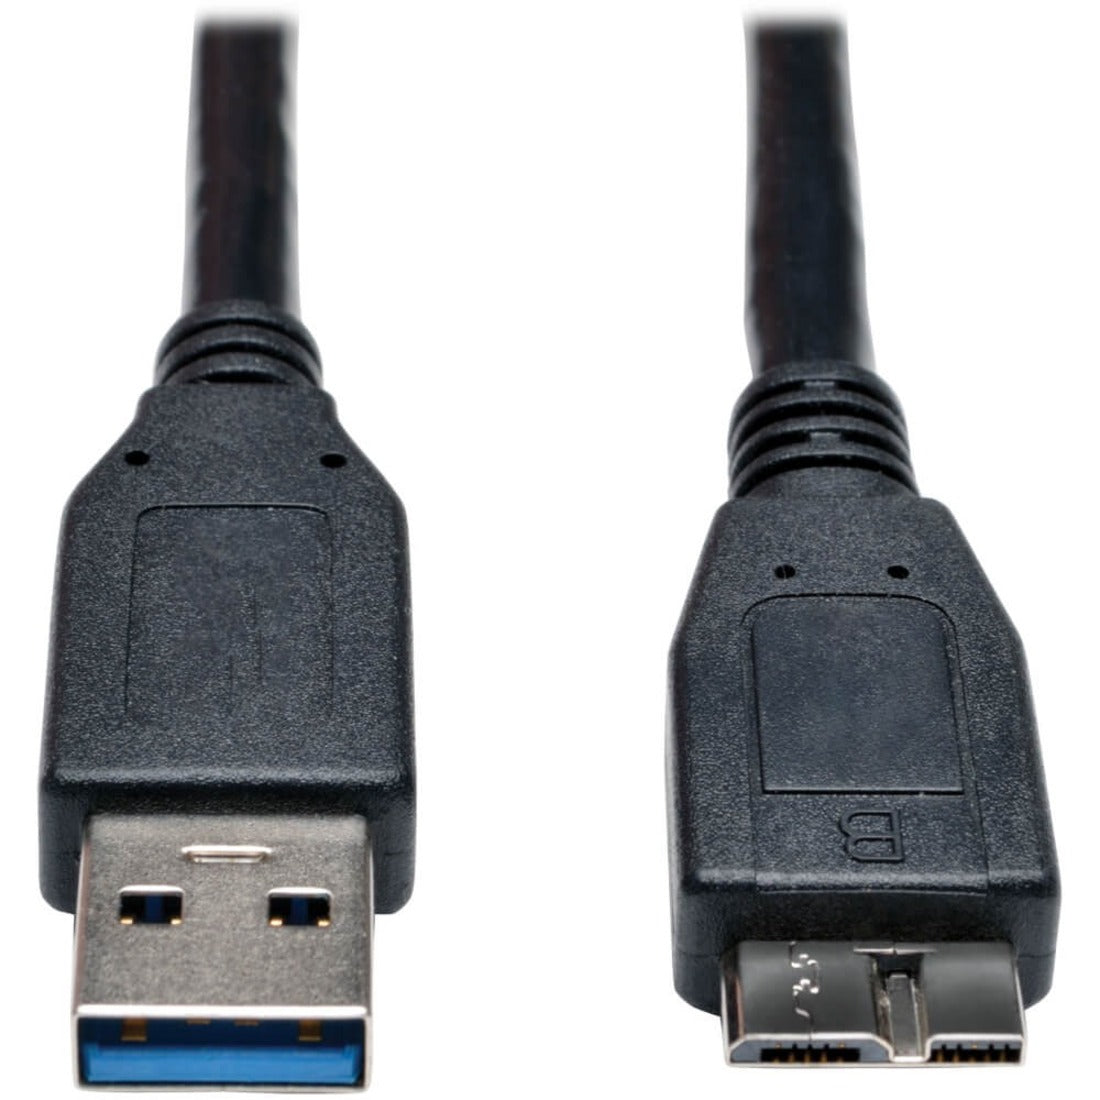 Tripp Lite U326-003-BK USB 3.0 SuperSpeed Device Cable (A to Micro-B M/M) Black, 3-ft.